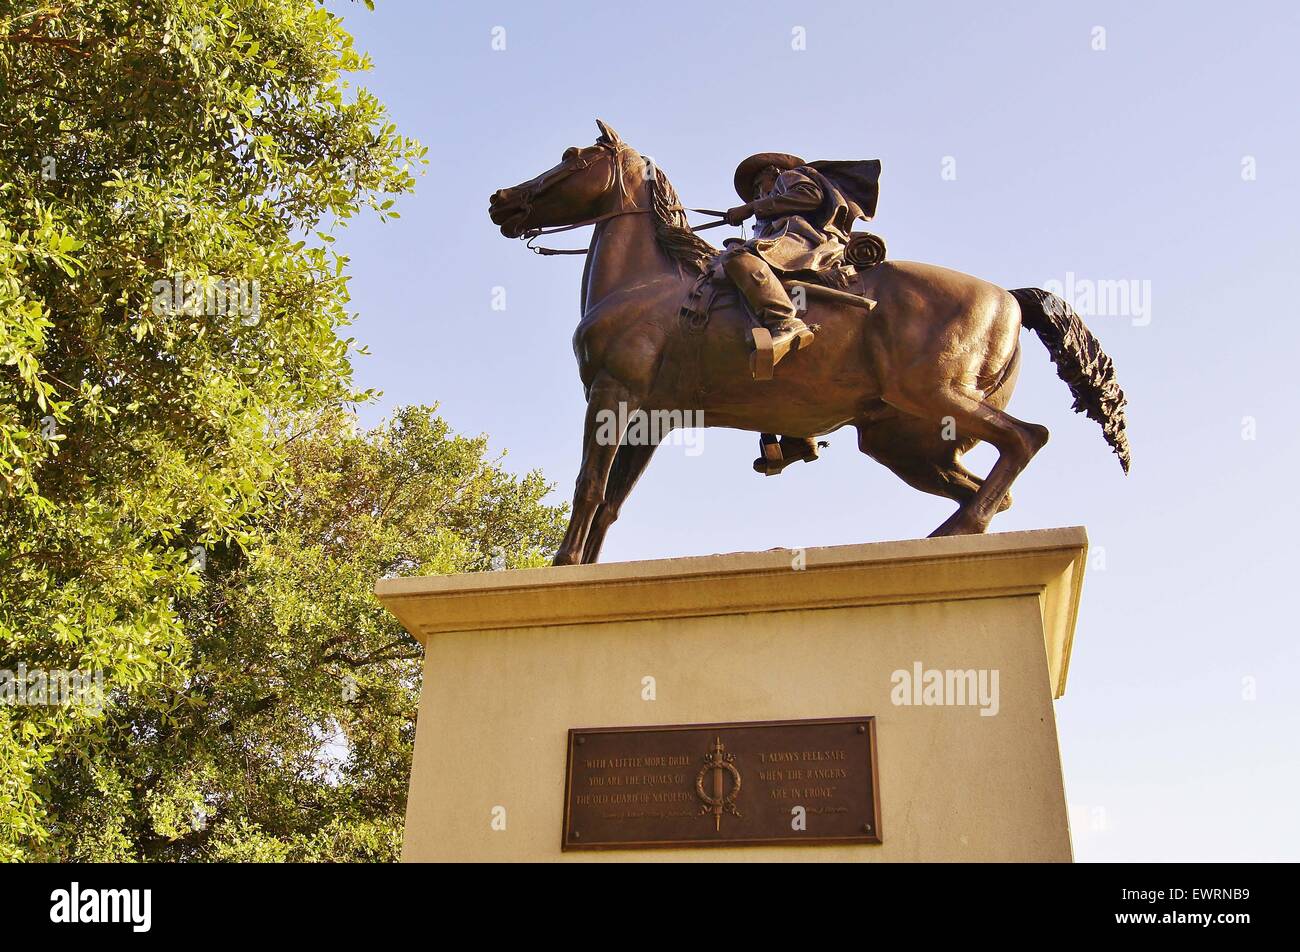 Austin, Texas, USA. 29th June, 2015. TERRY'S TEXAS RANGERS.Erected 1907 by surviving comrades.The bronze statue, by Pompeo Coppini, portrays one of Terry's Texas Rangers astride a spirited horse. In 1861, during the Civil War, Terry's Texas Rangers were mustered at Houston after Benjamin Terry and Thomas Lubbock's call for volunteers. Ten companies of 100 men each were formally activated as the 8th Texas Cavalry, and during the following five years participated in many engagements defending the Southern Confederacy. © Jeff Newman/Globe Photos/ZUMA Wire/Alamy Live News Stock Photo